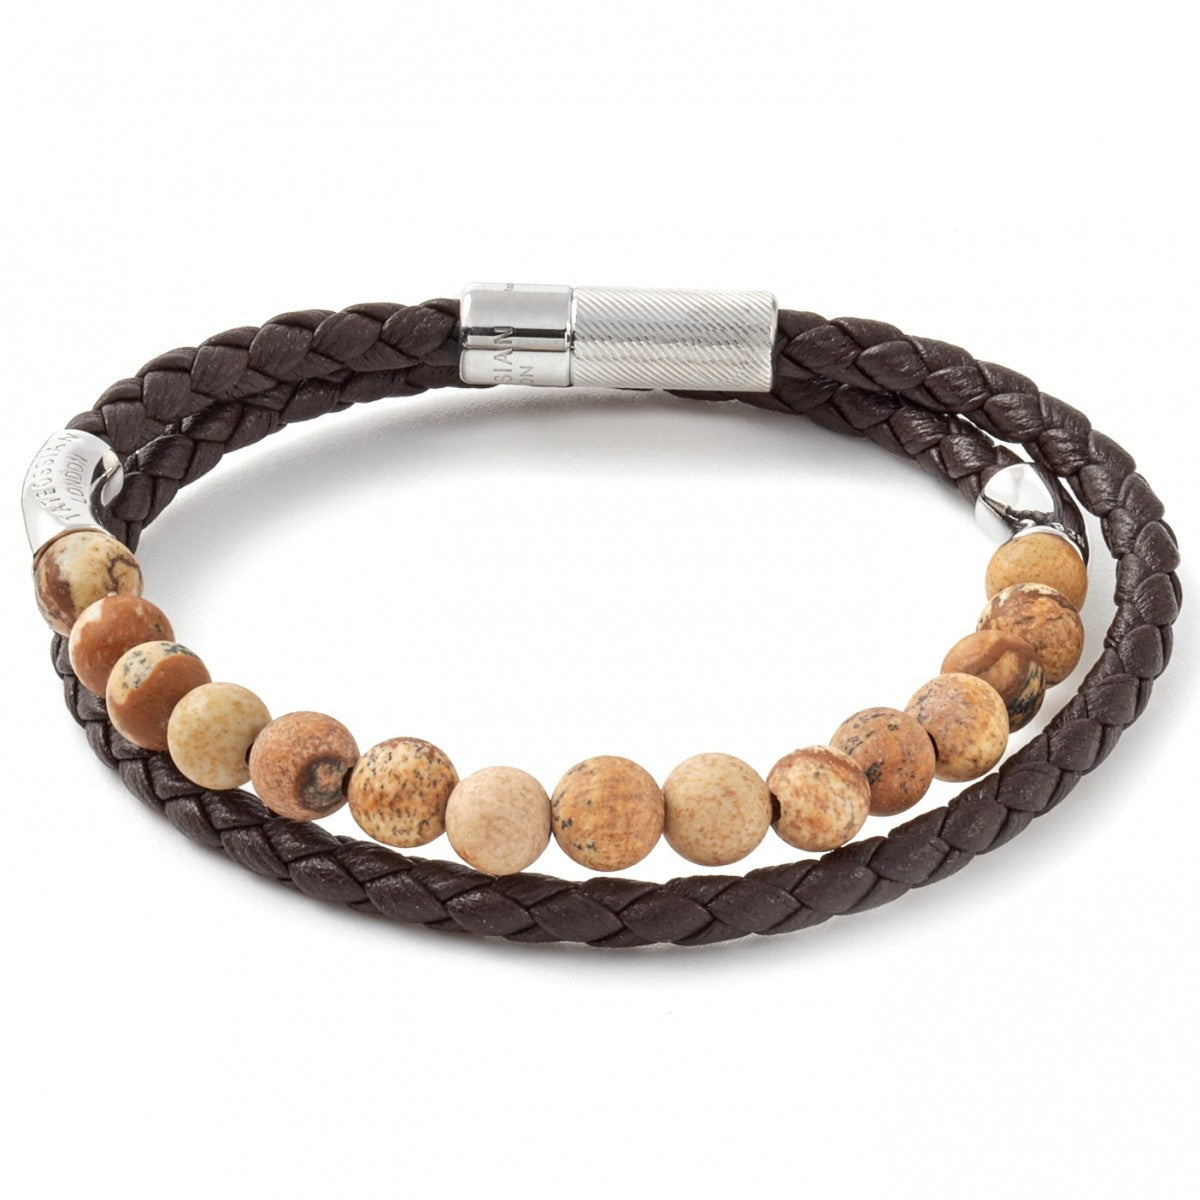 Tateossian Havana Jasper Beads and Leather Bracelet, Brown with Silver Clasp